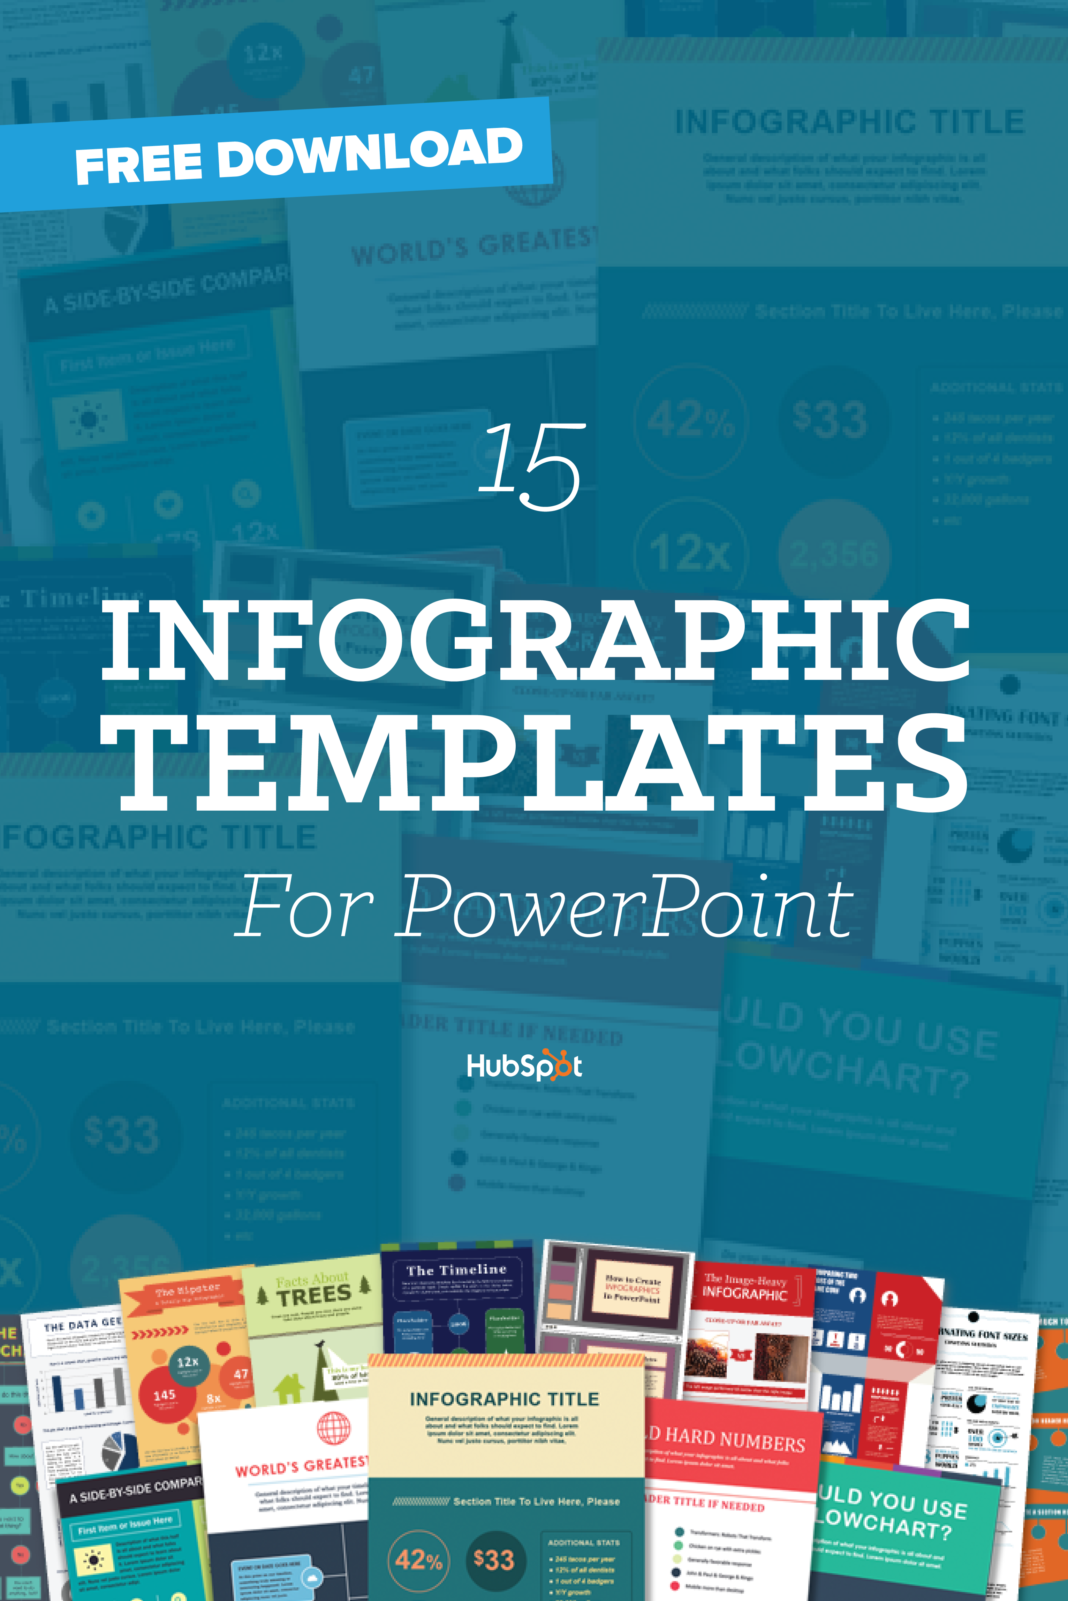 Infographic Template 15 Free Infographic Templates InfographicNow Your Number One